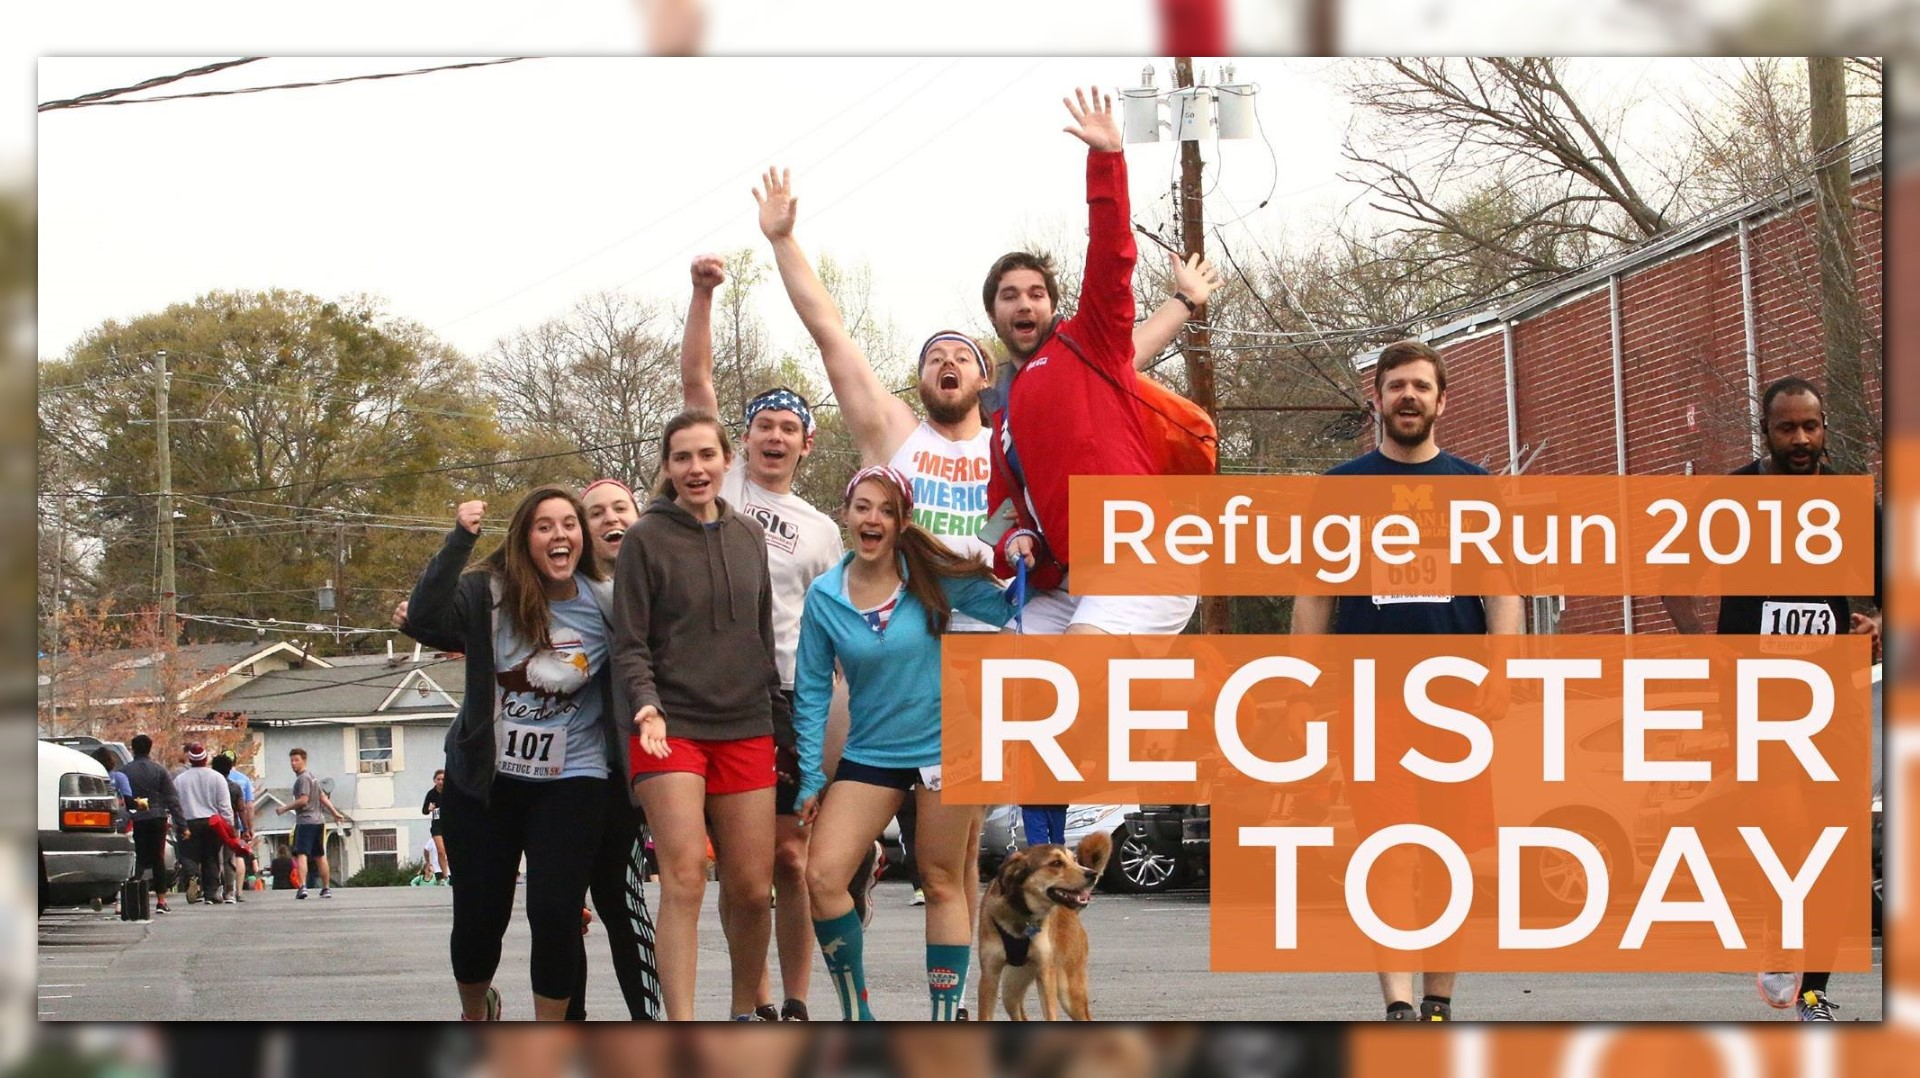 Refuge Run to raise money for families in need